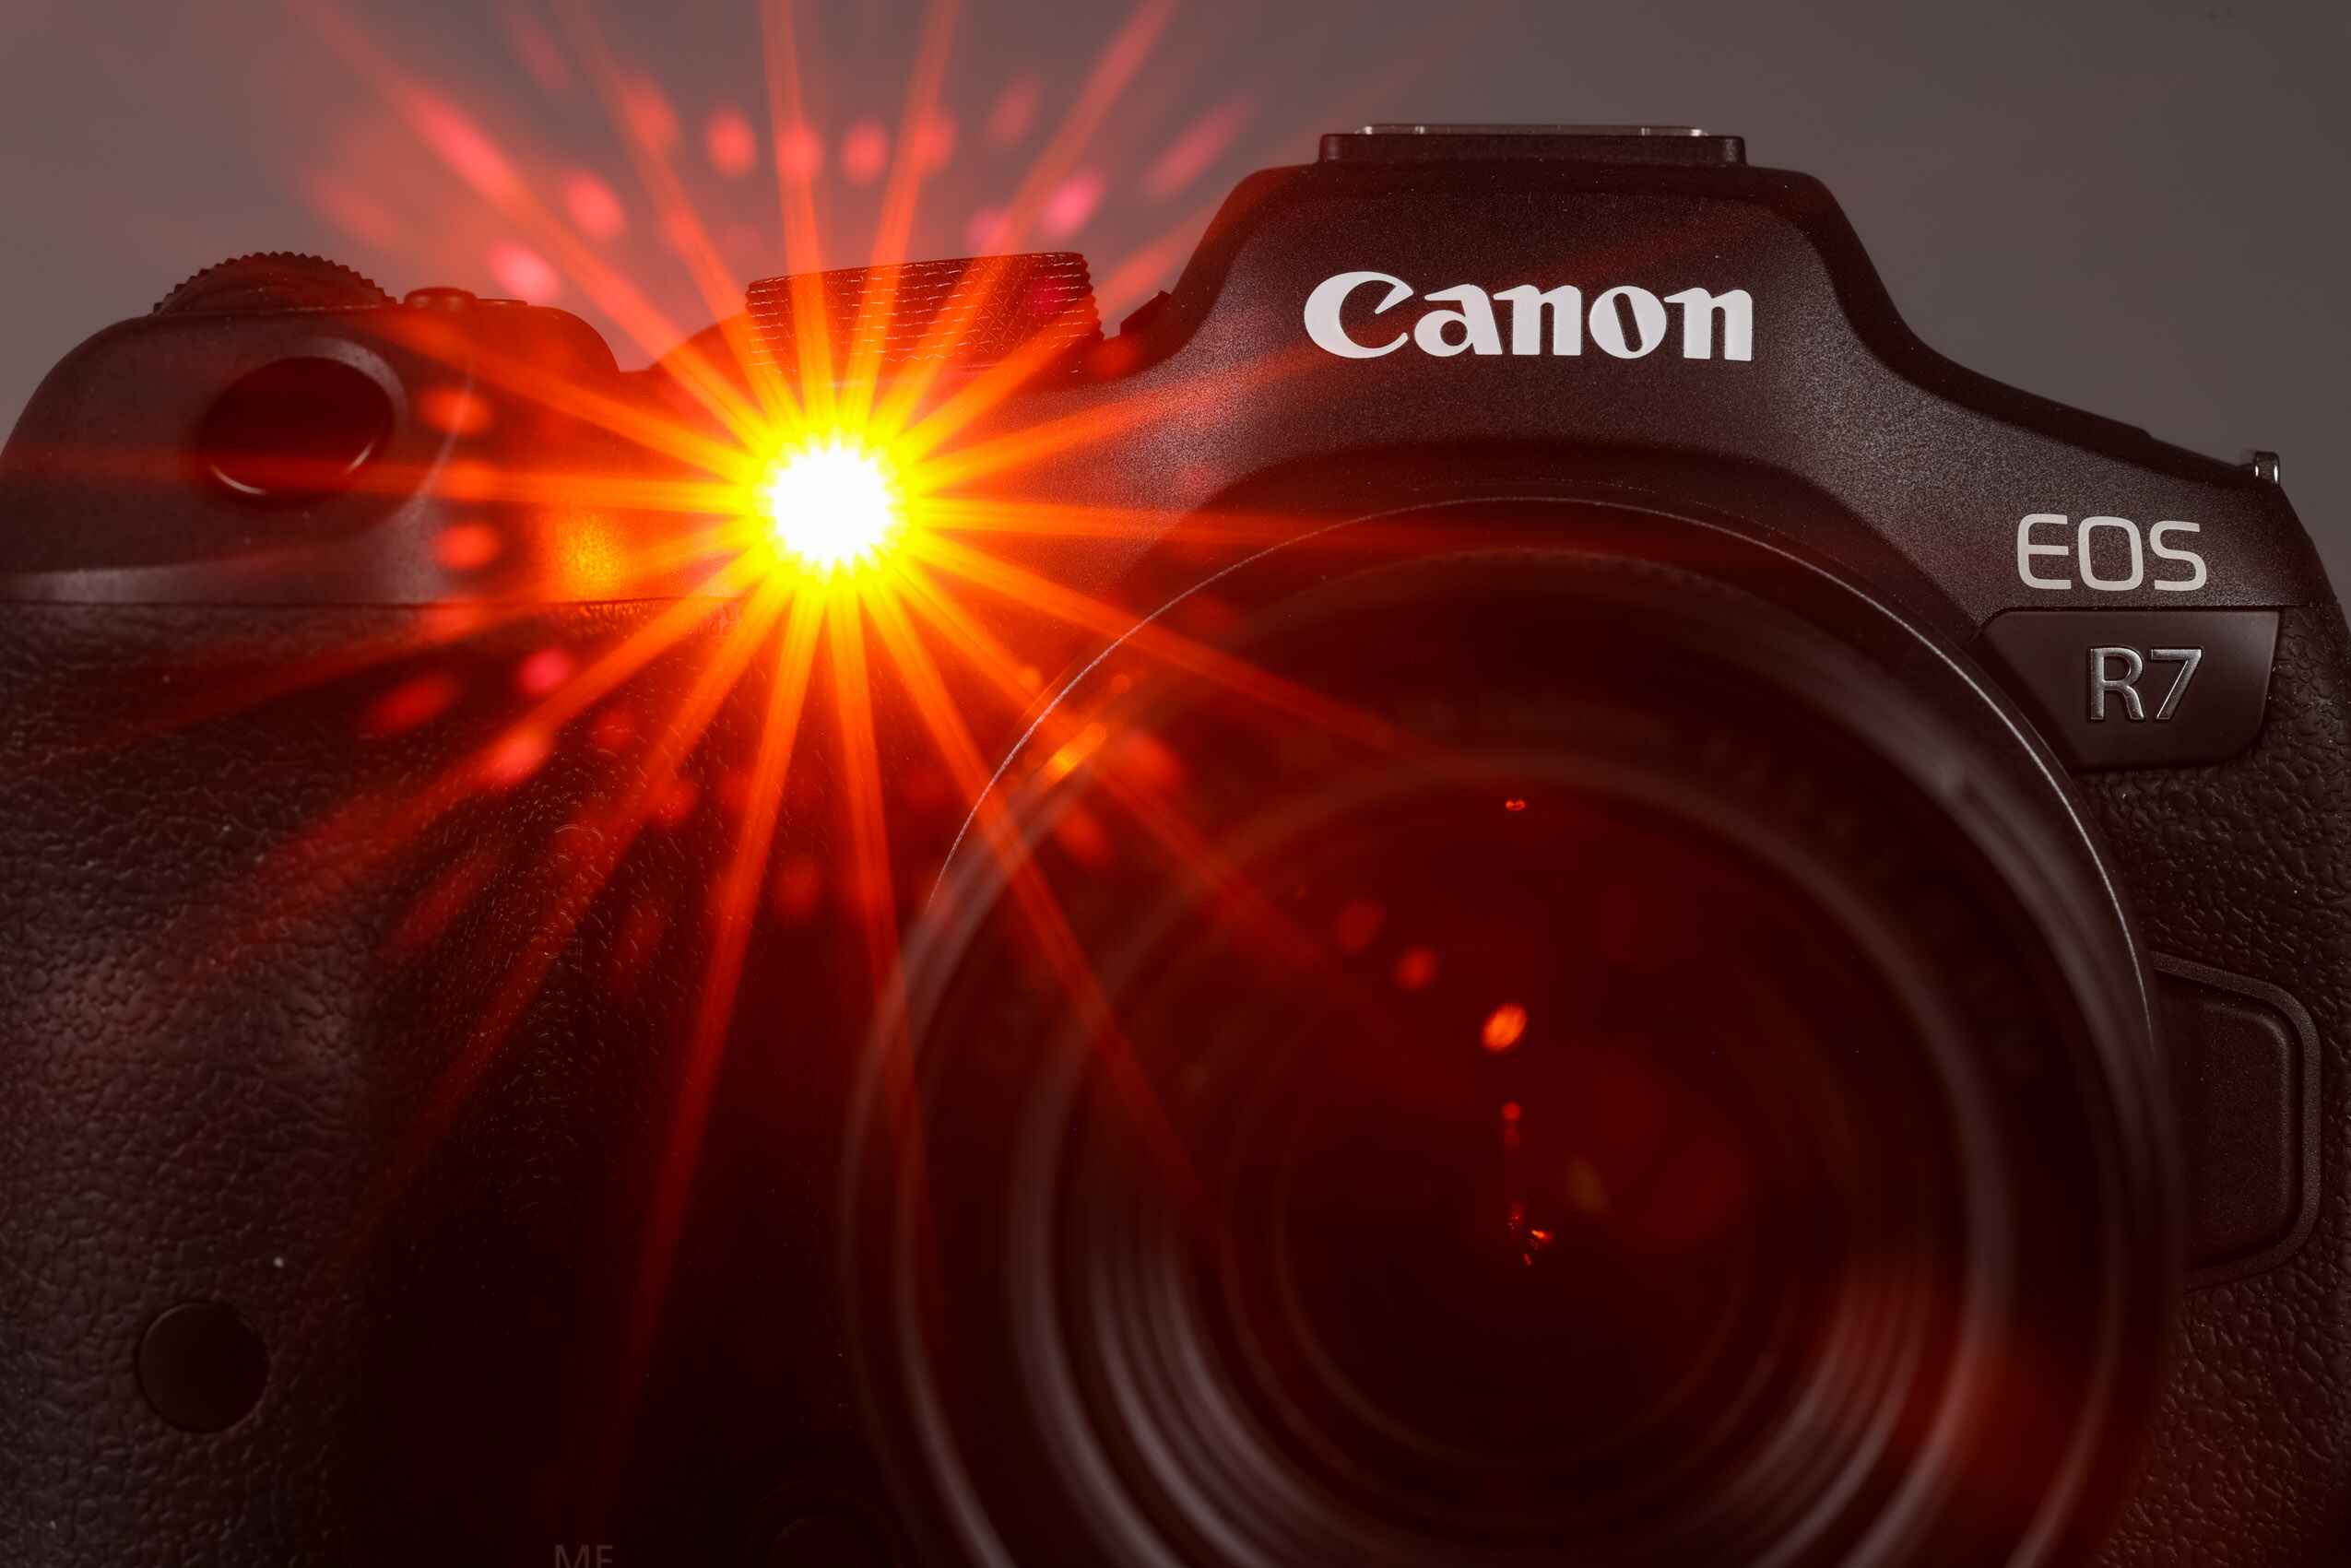 How To Capture Red Colors With A DSLR Camera